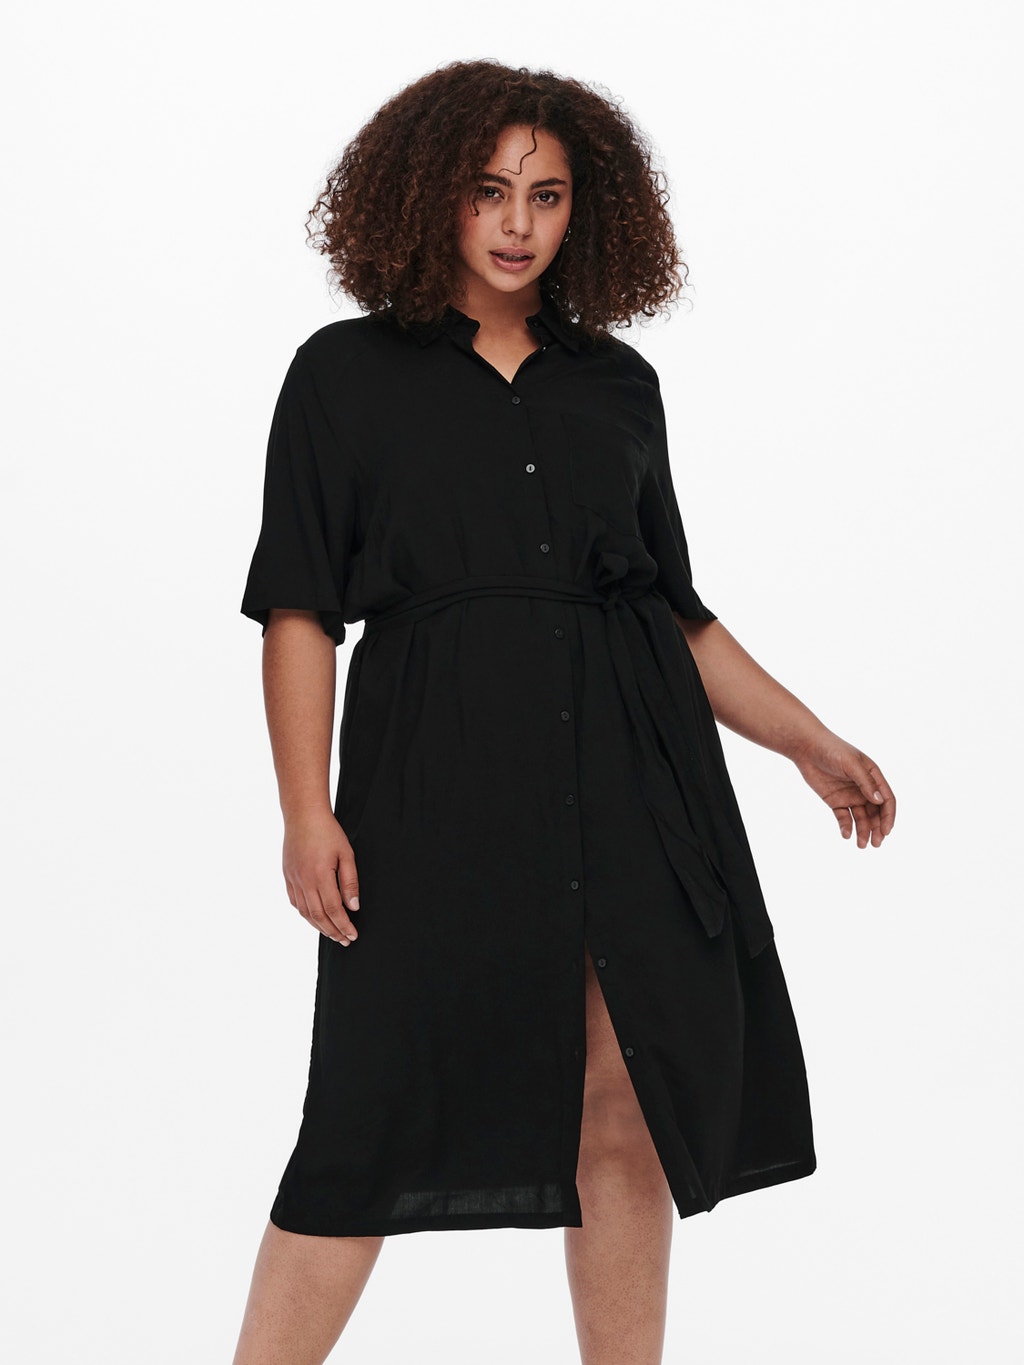 Curvy solid colored Shirt dress | Black | ONLY®